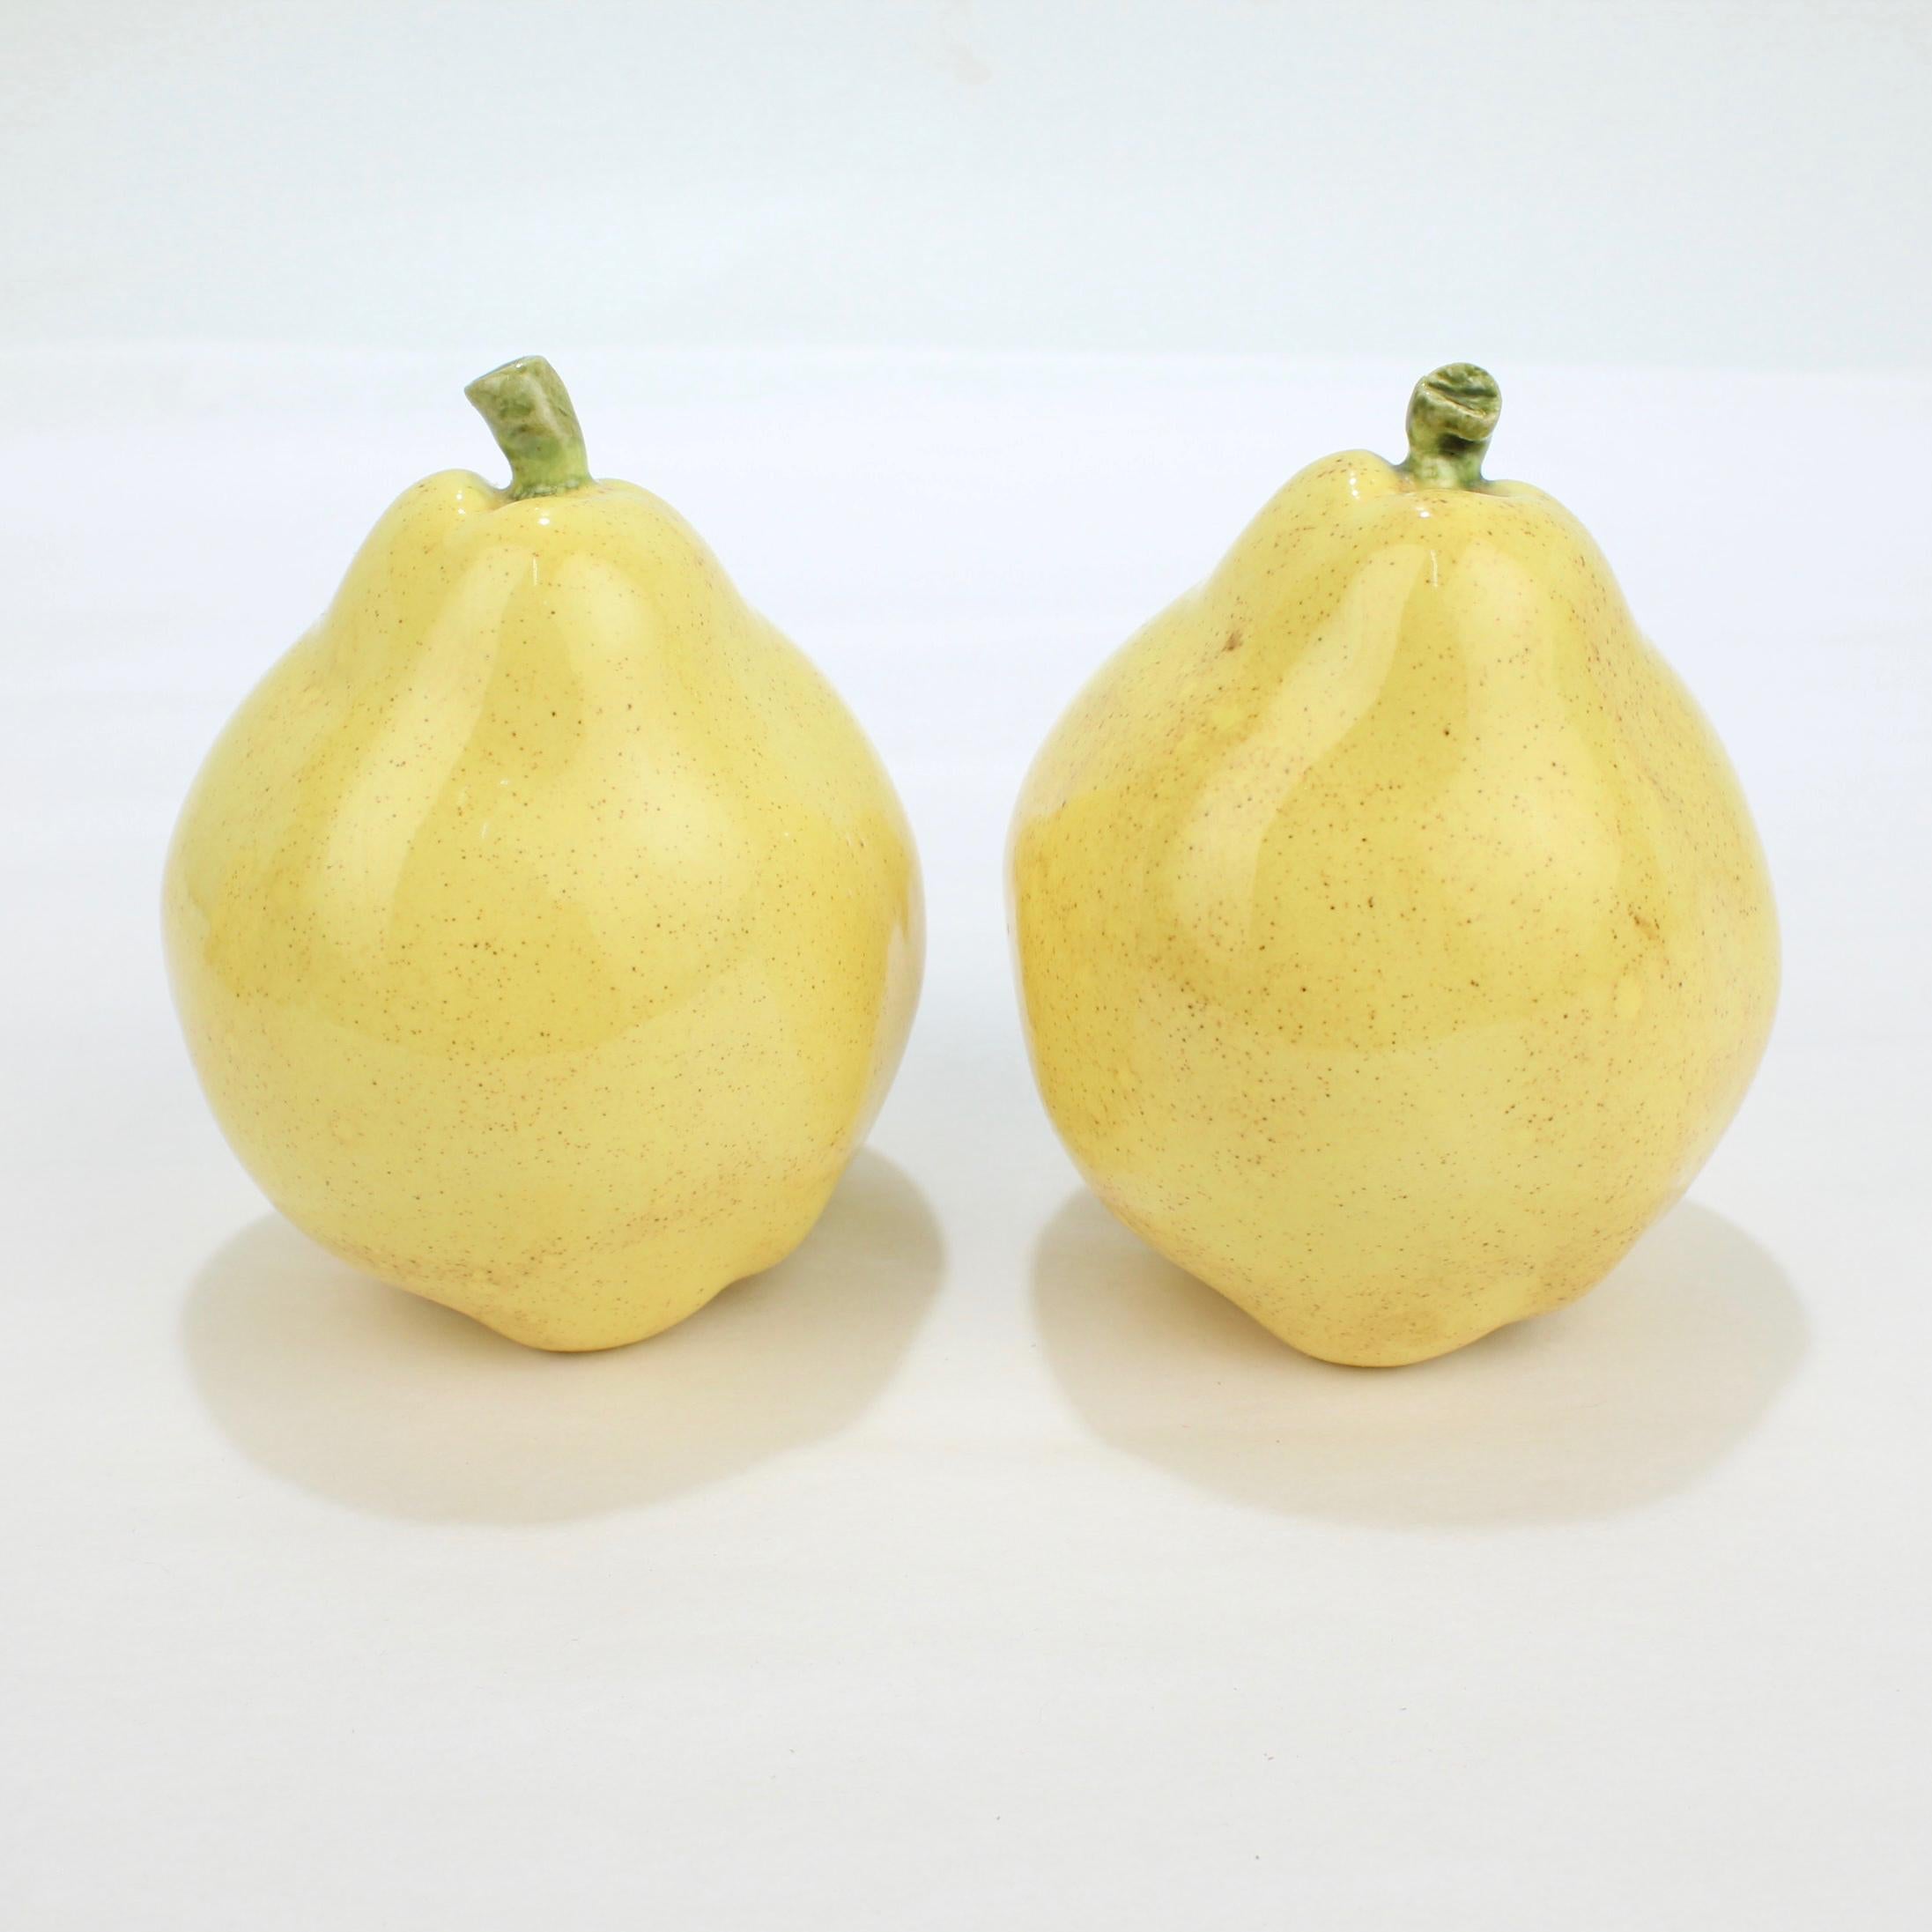 2 Pairs of Pear Shaped Yellow Pottery Salt and Pepper Shakers For Sale 4